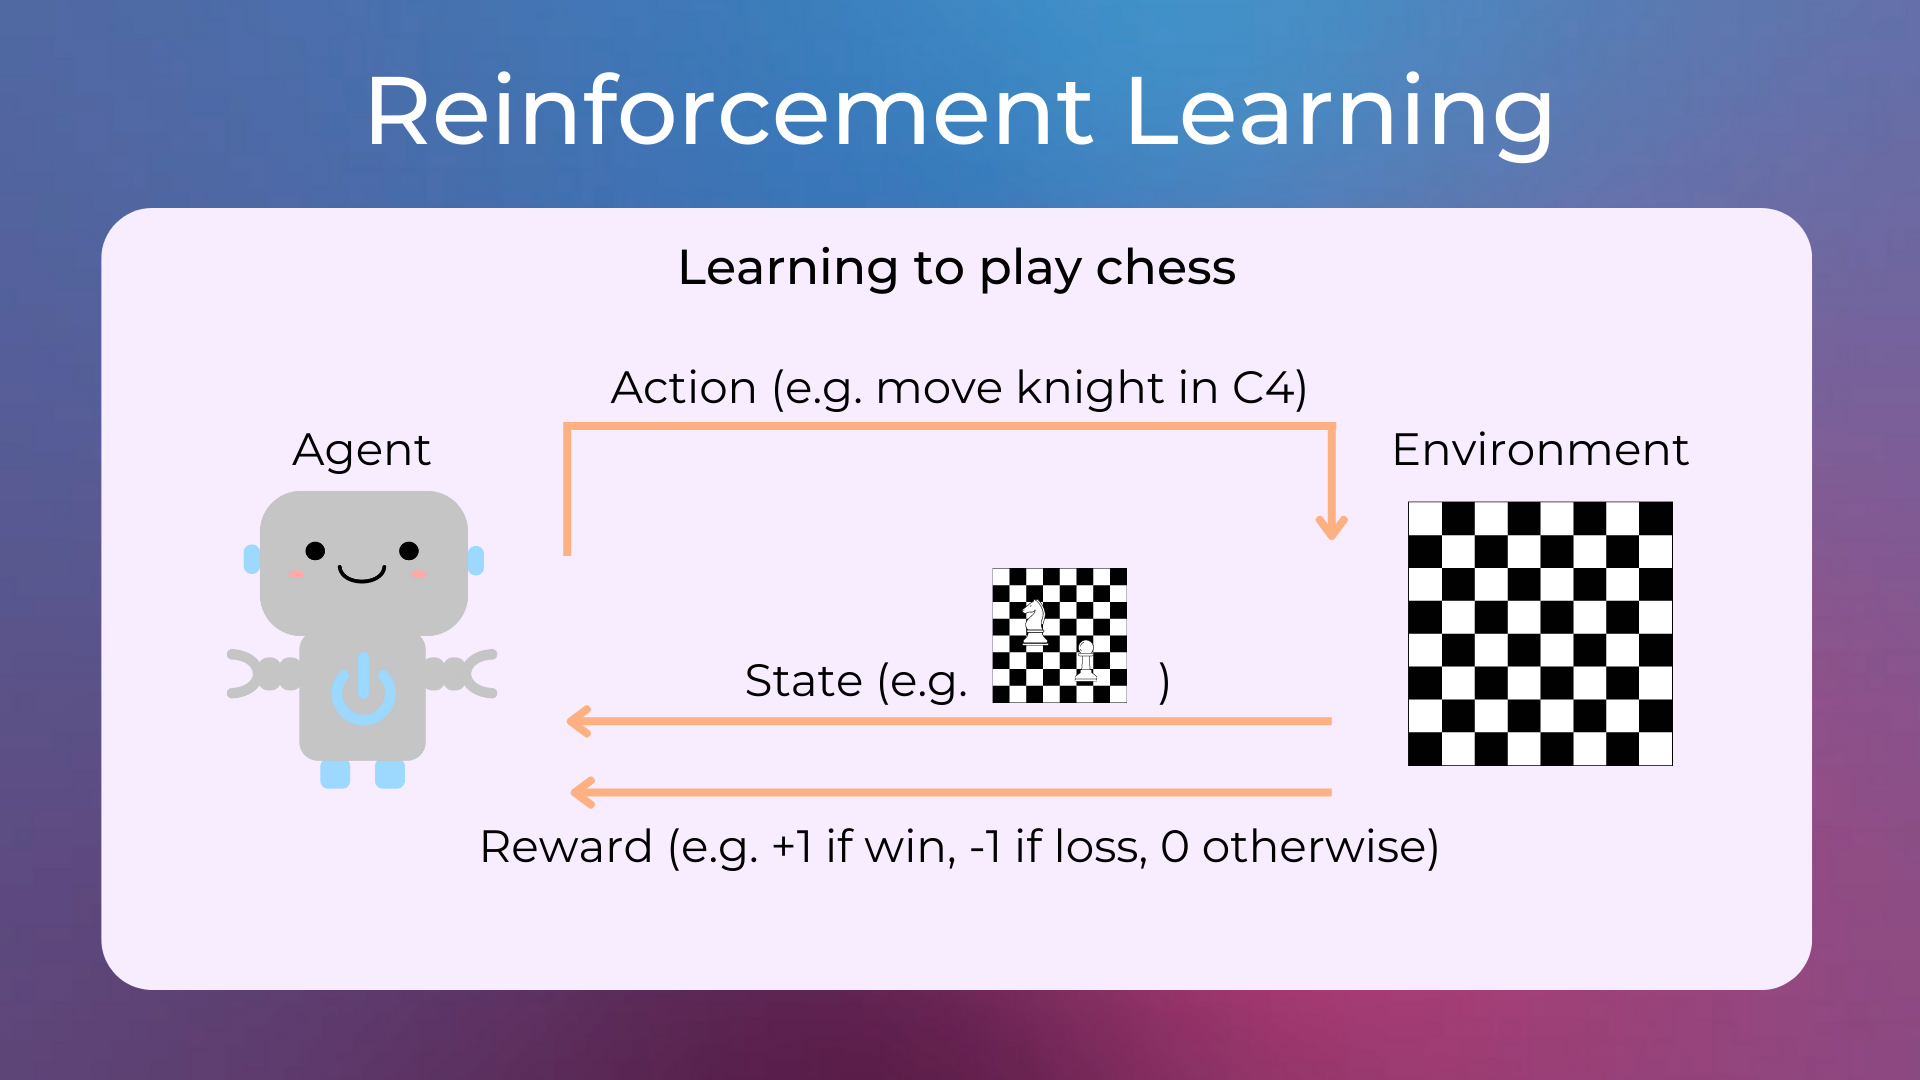 _images/reinforcement_learning.png